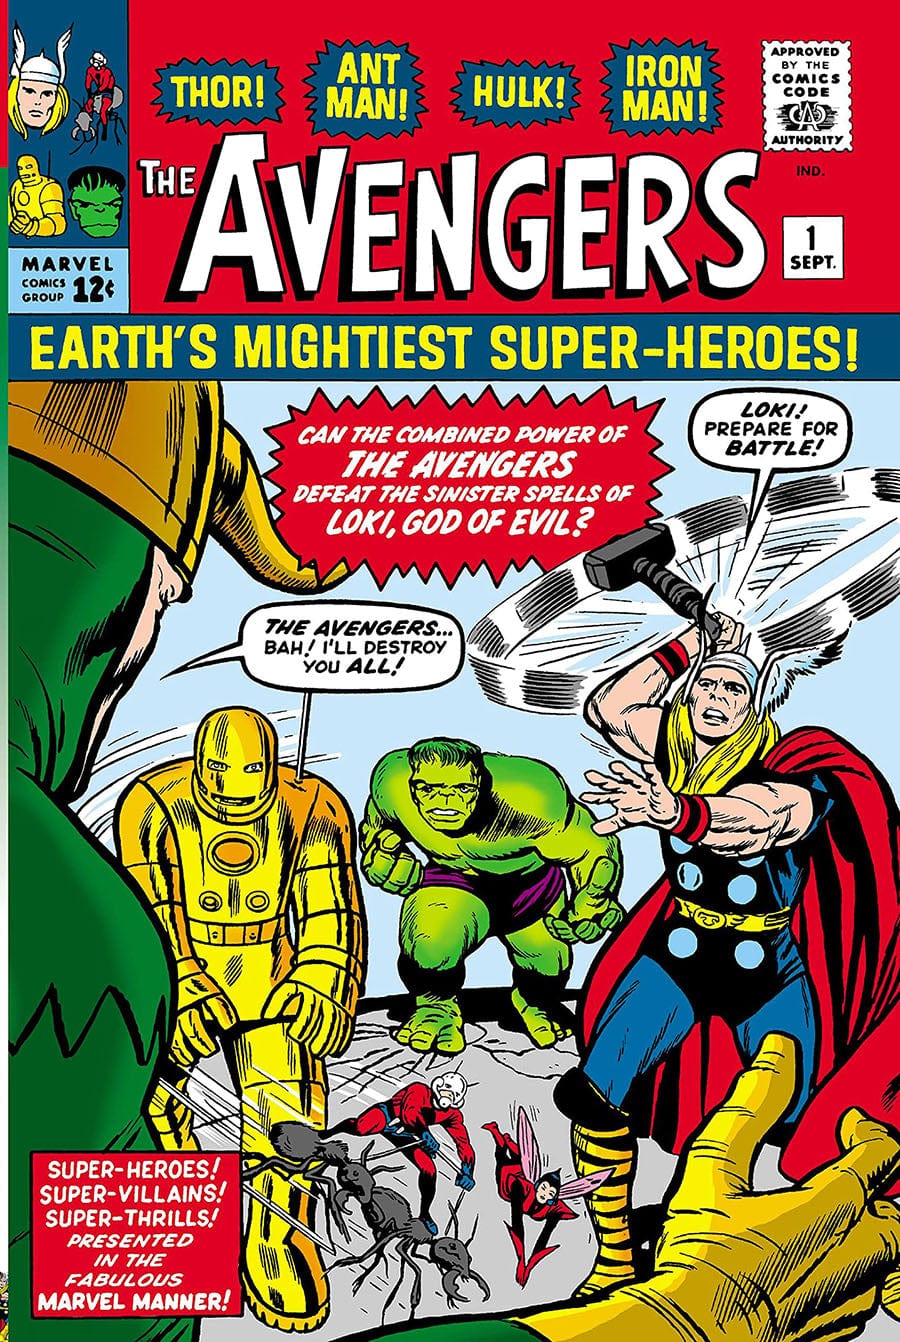 Avengers Vol. 1: Coming of the Avengers - Jack Kirby Variant (Mighty Marvel Masterworks) - Third Eye